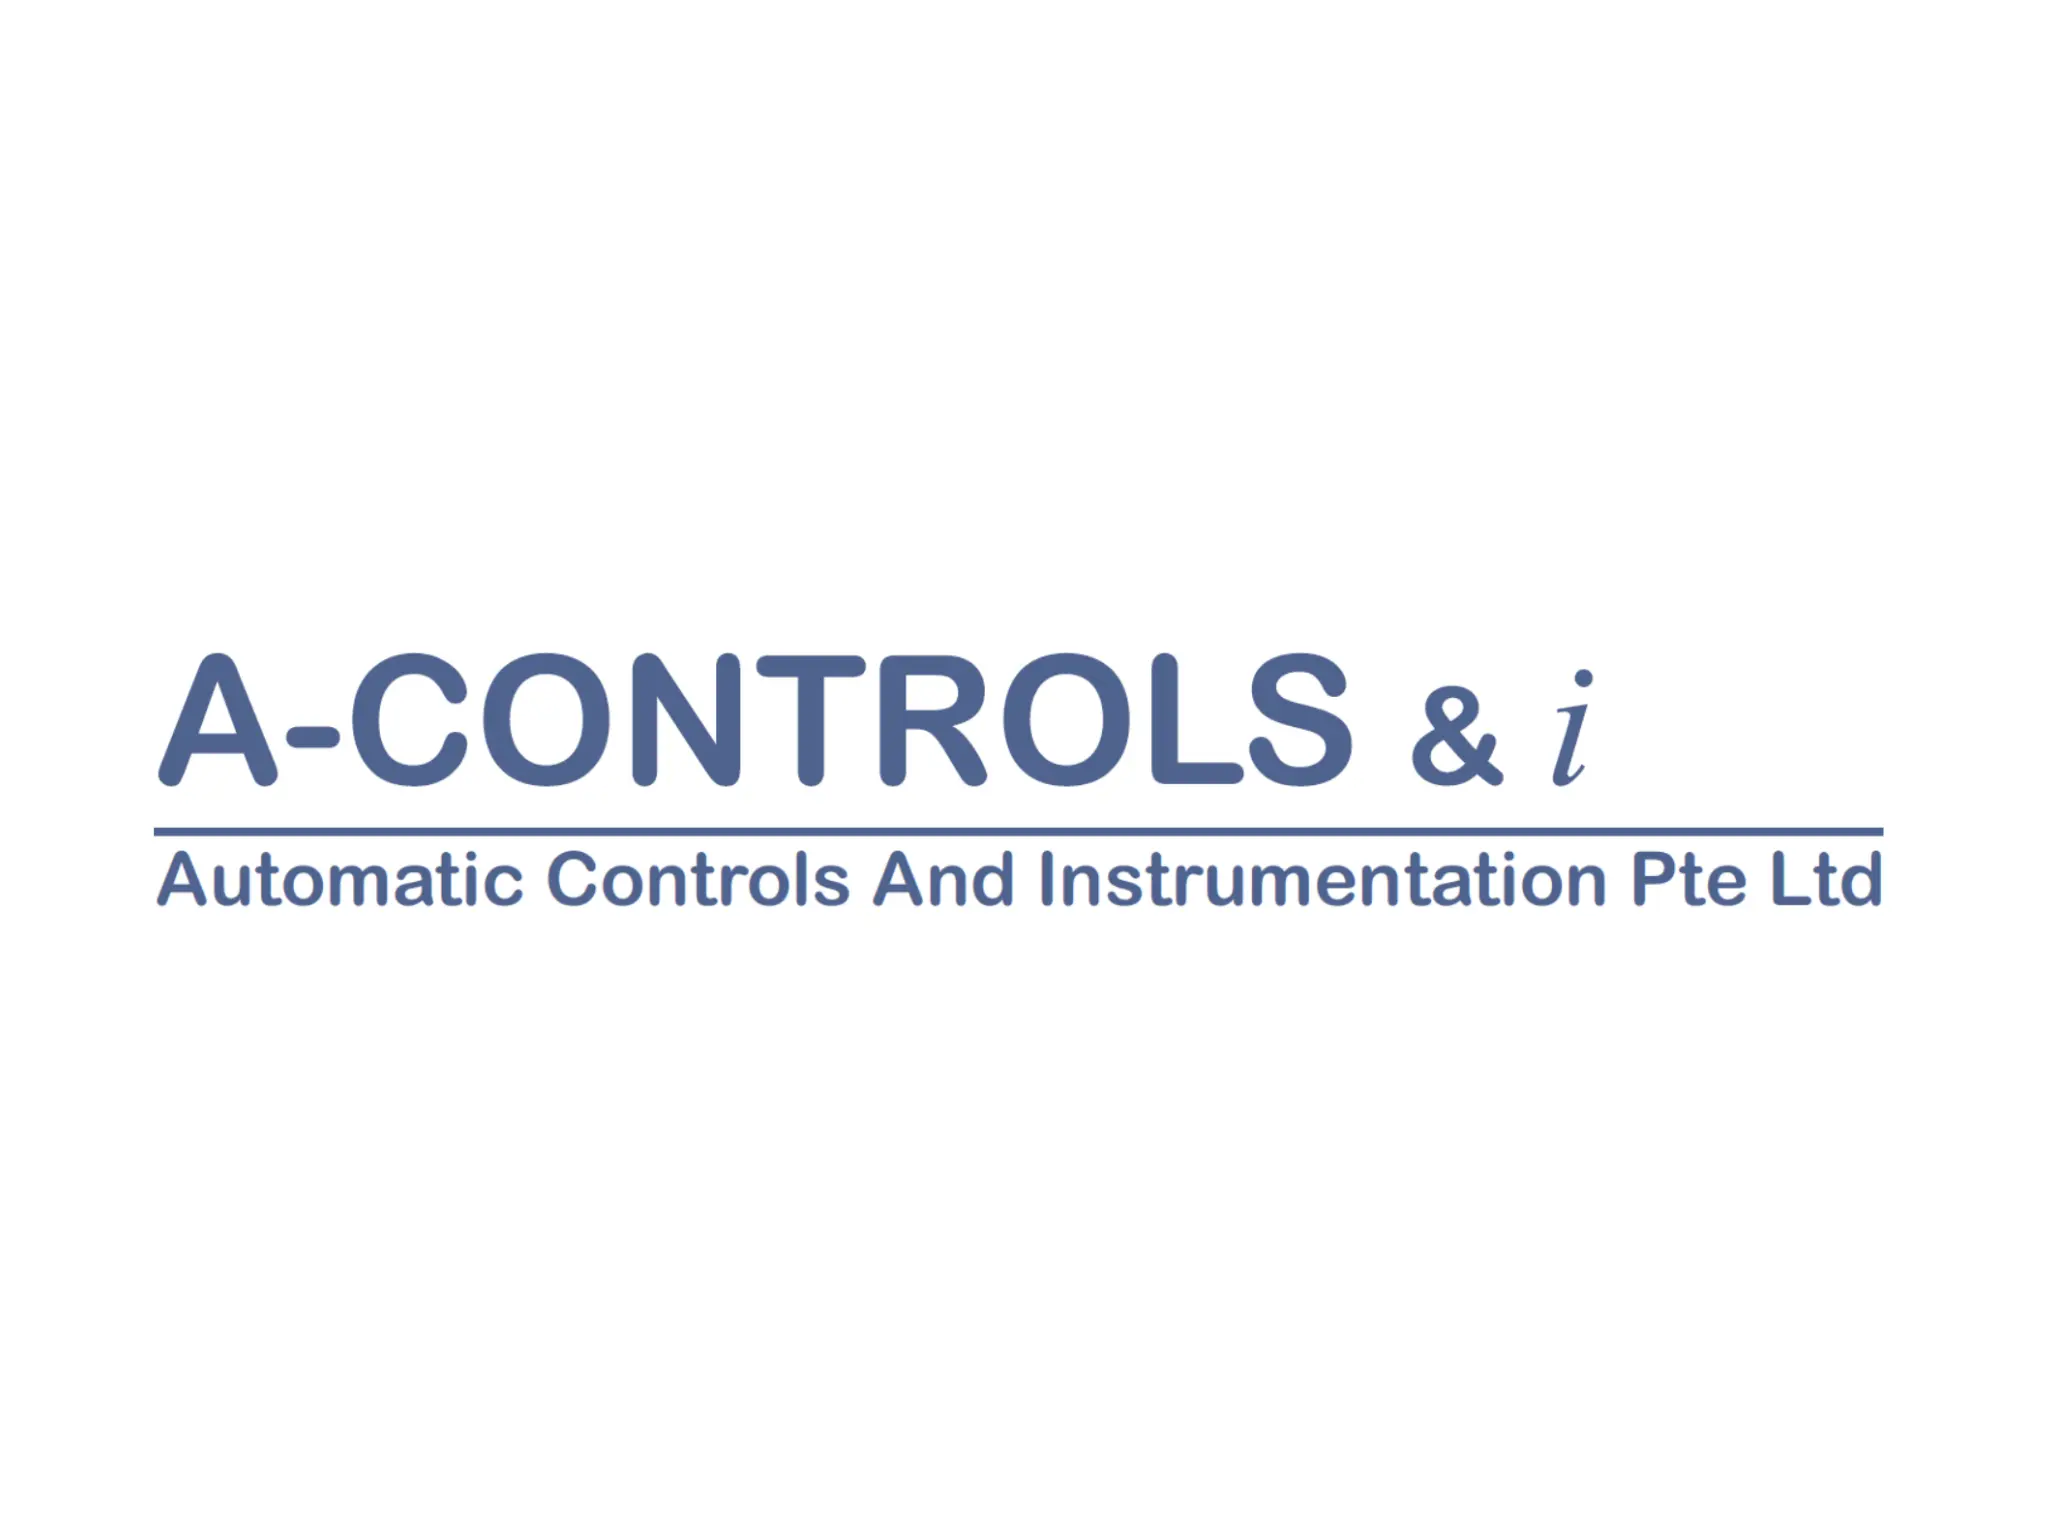 AUTOMATIC CONTROLS AND INSTRUMENTATION